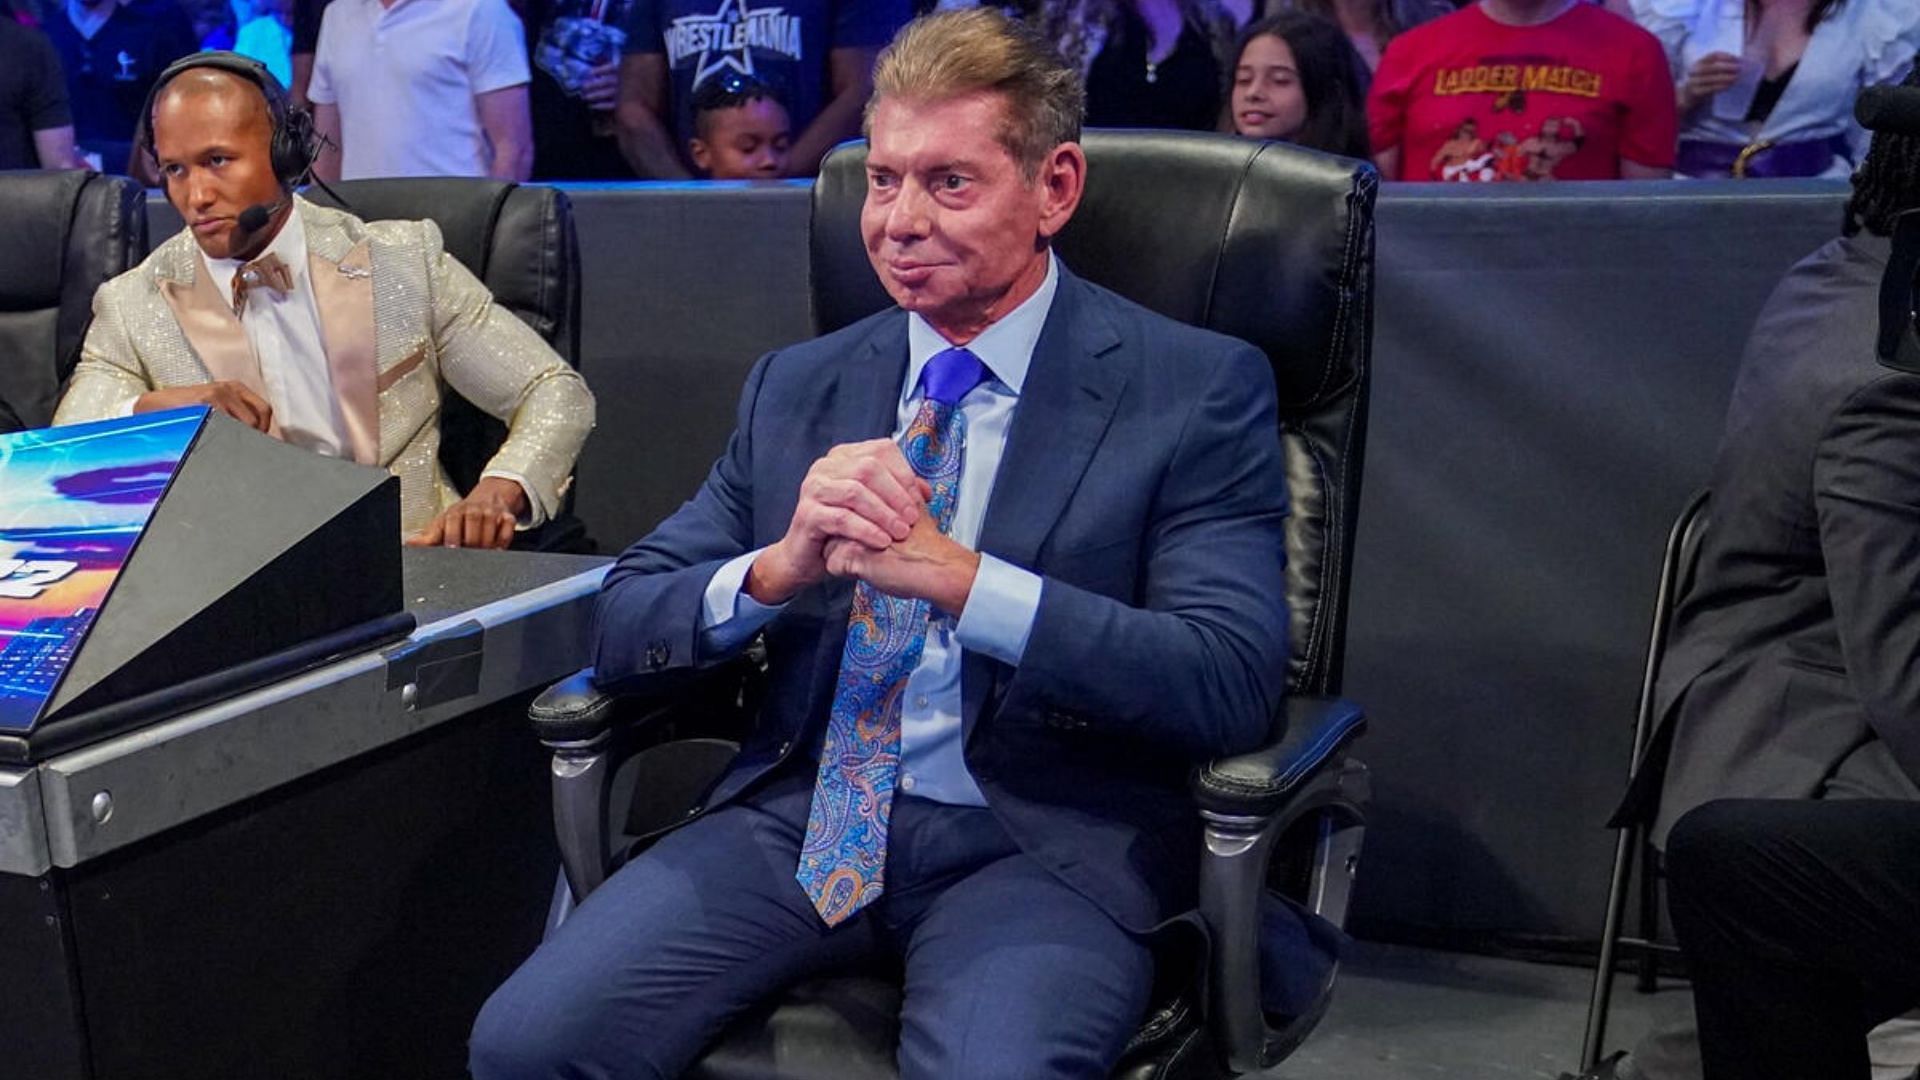 Vince McMahon is no longer associated with WWE